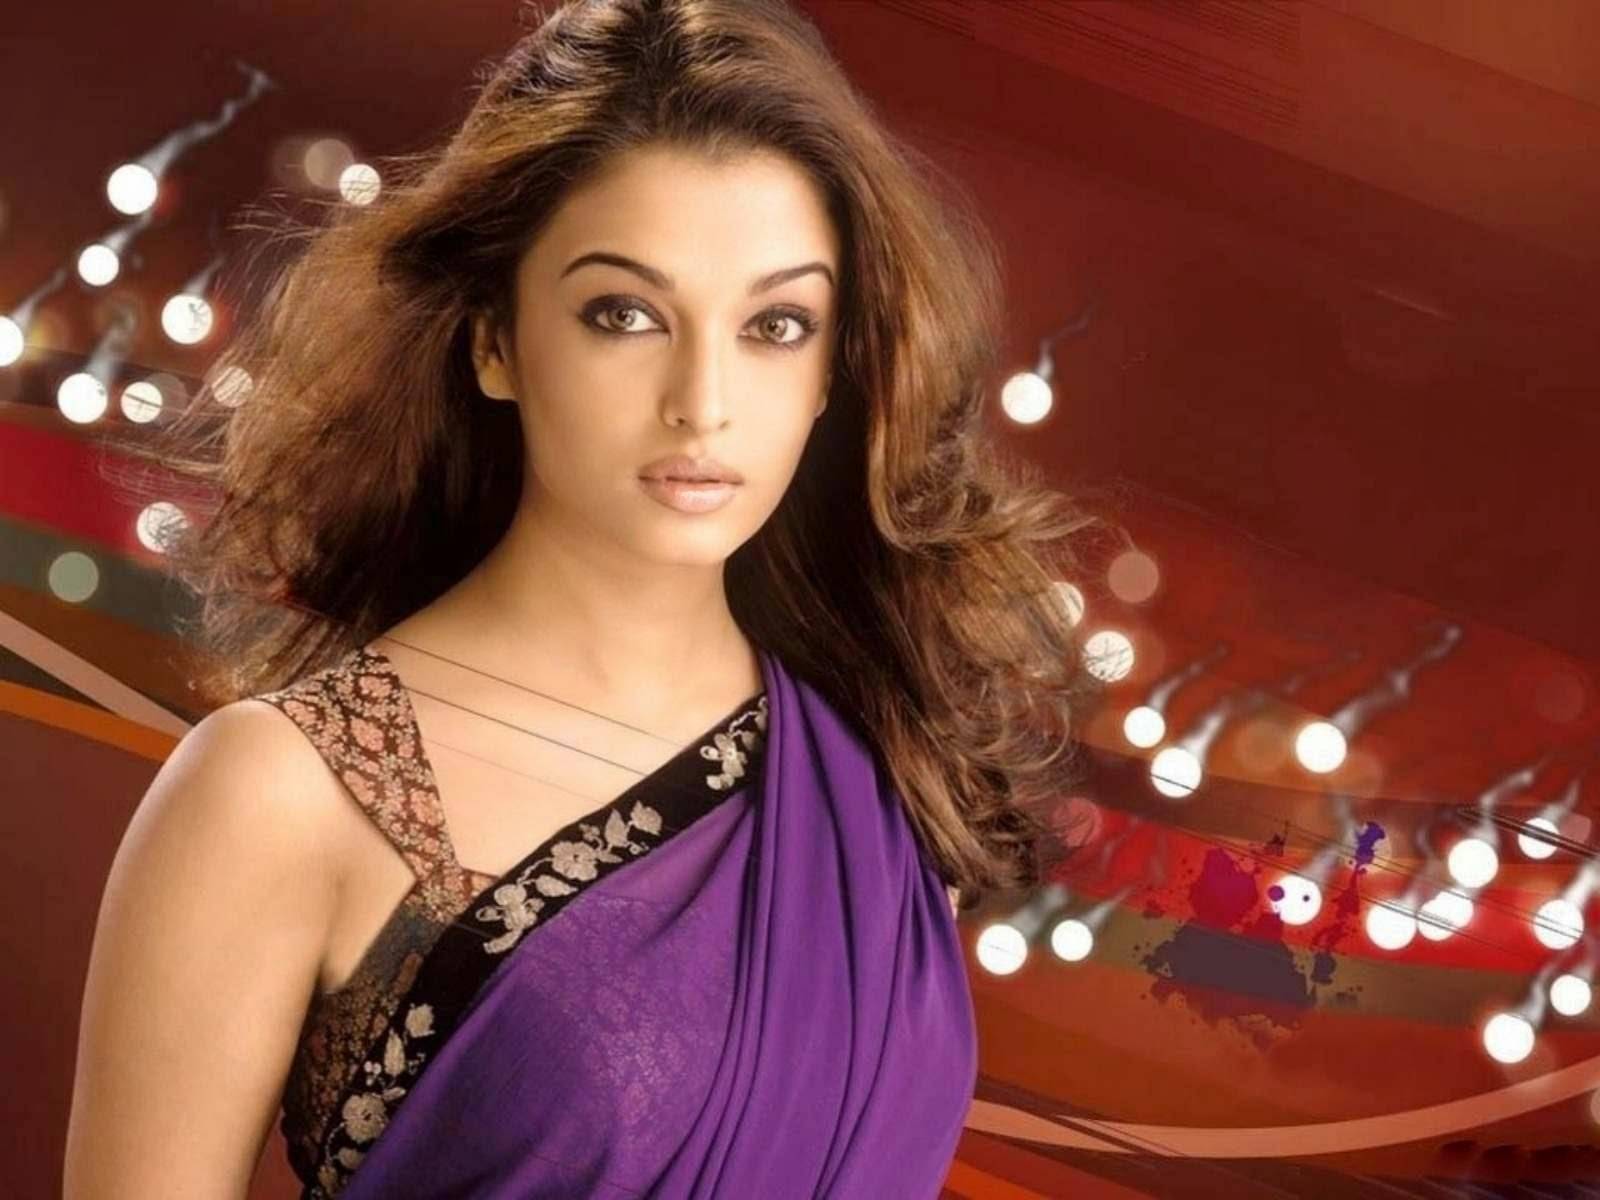 ACTRESS+BOLLYWOOD+TAMIL+AISHWARYA+RAI+HOT+SAREE+SEXY+CUTE+HOMELY+BEAUTIFUL+LATEST+NEW+CELEBRITY+NAVEL+WET+STUNT+MOVIE+WALLPAPERS+MAGAZINE+STILLS+PICTURES+POSTERS+28.jpg